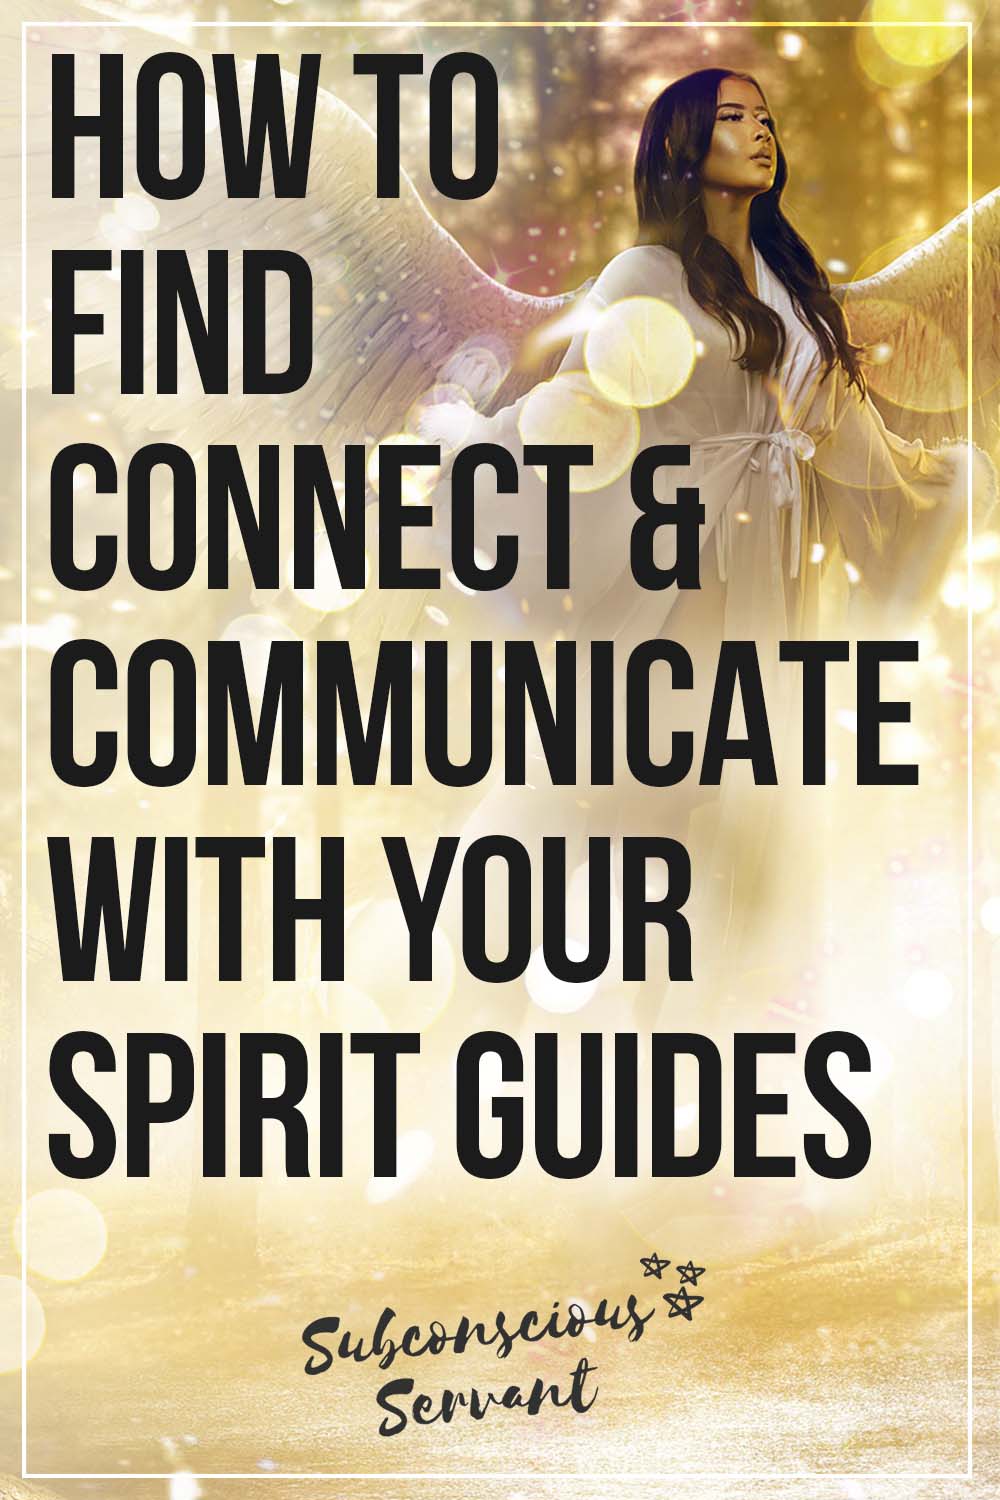 How To Find Your Spirit Guides + Connect & Communicate With Them